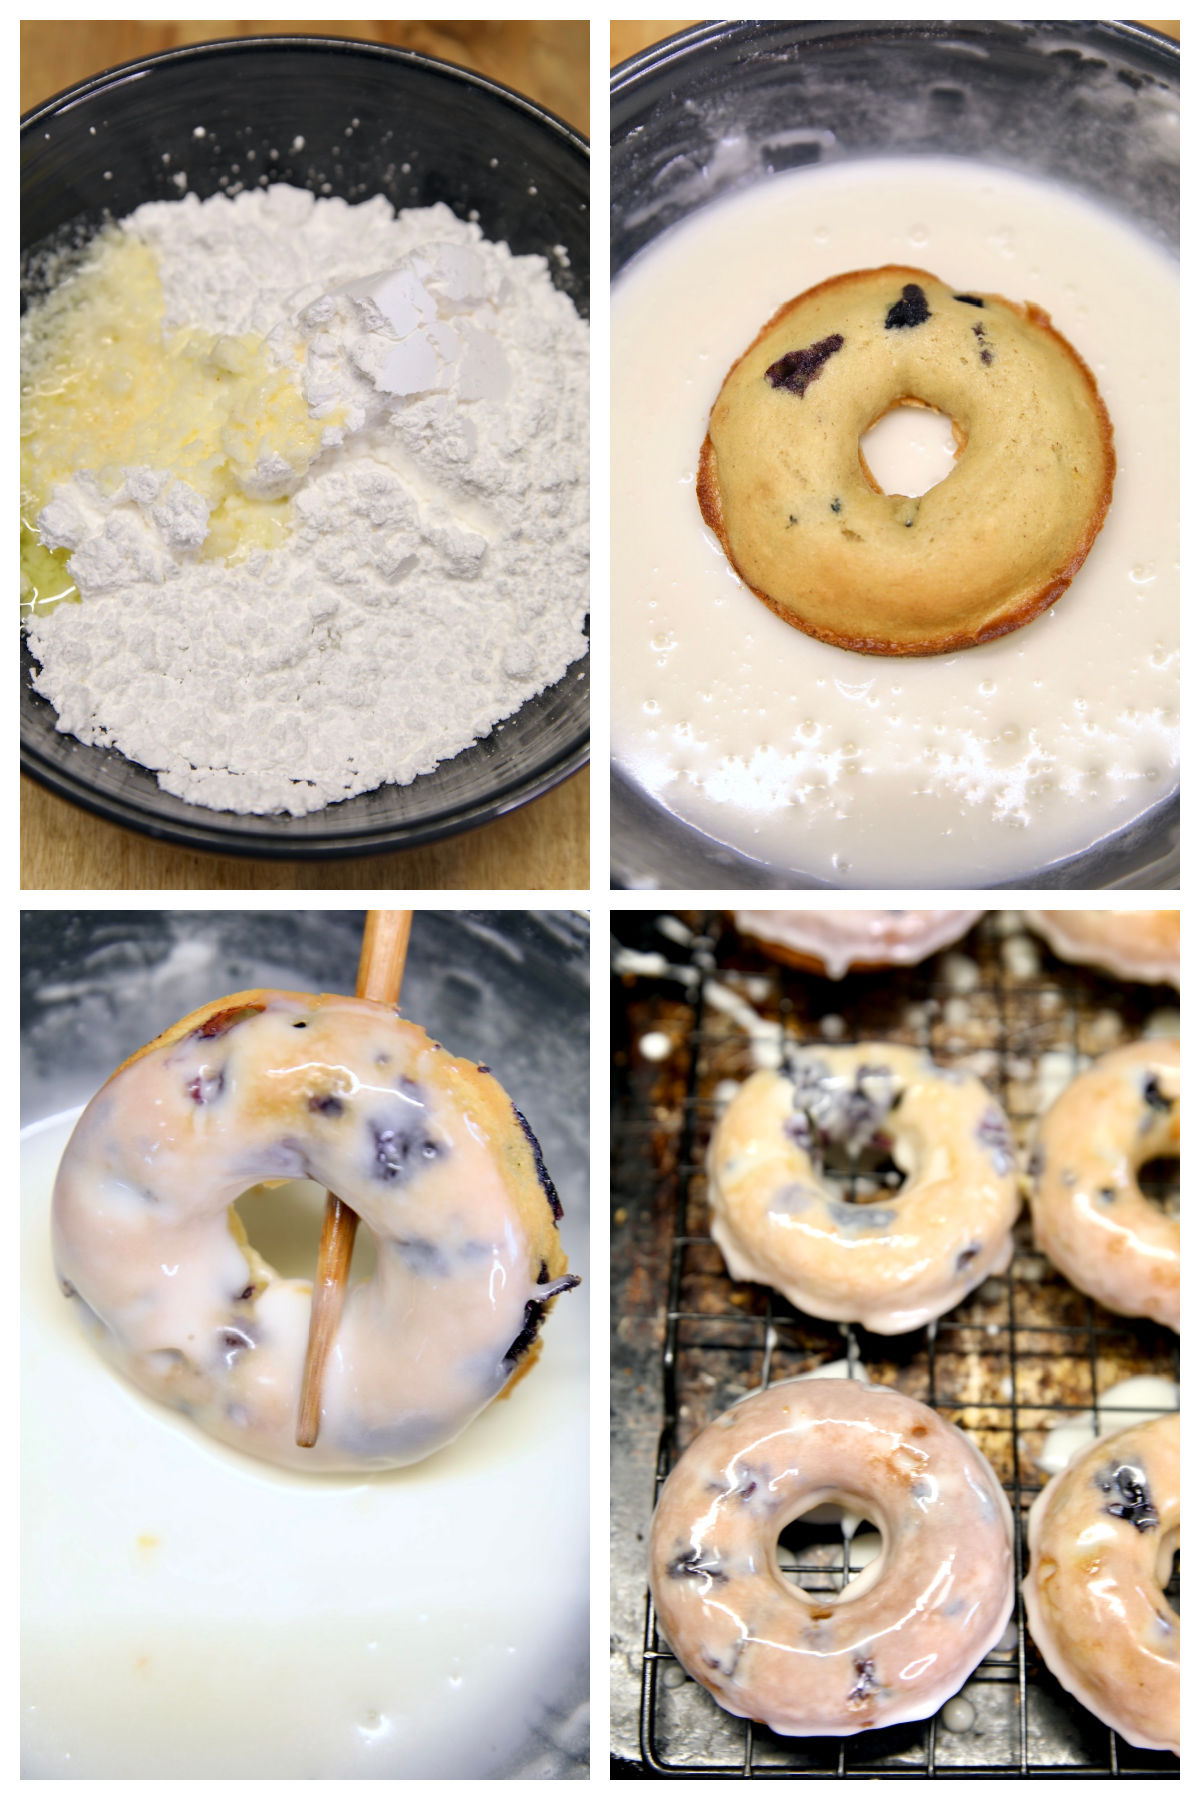 Collage dipping blueberry donuts in glaze.